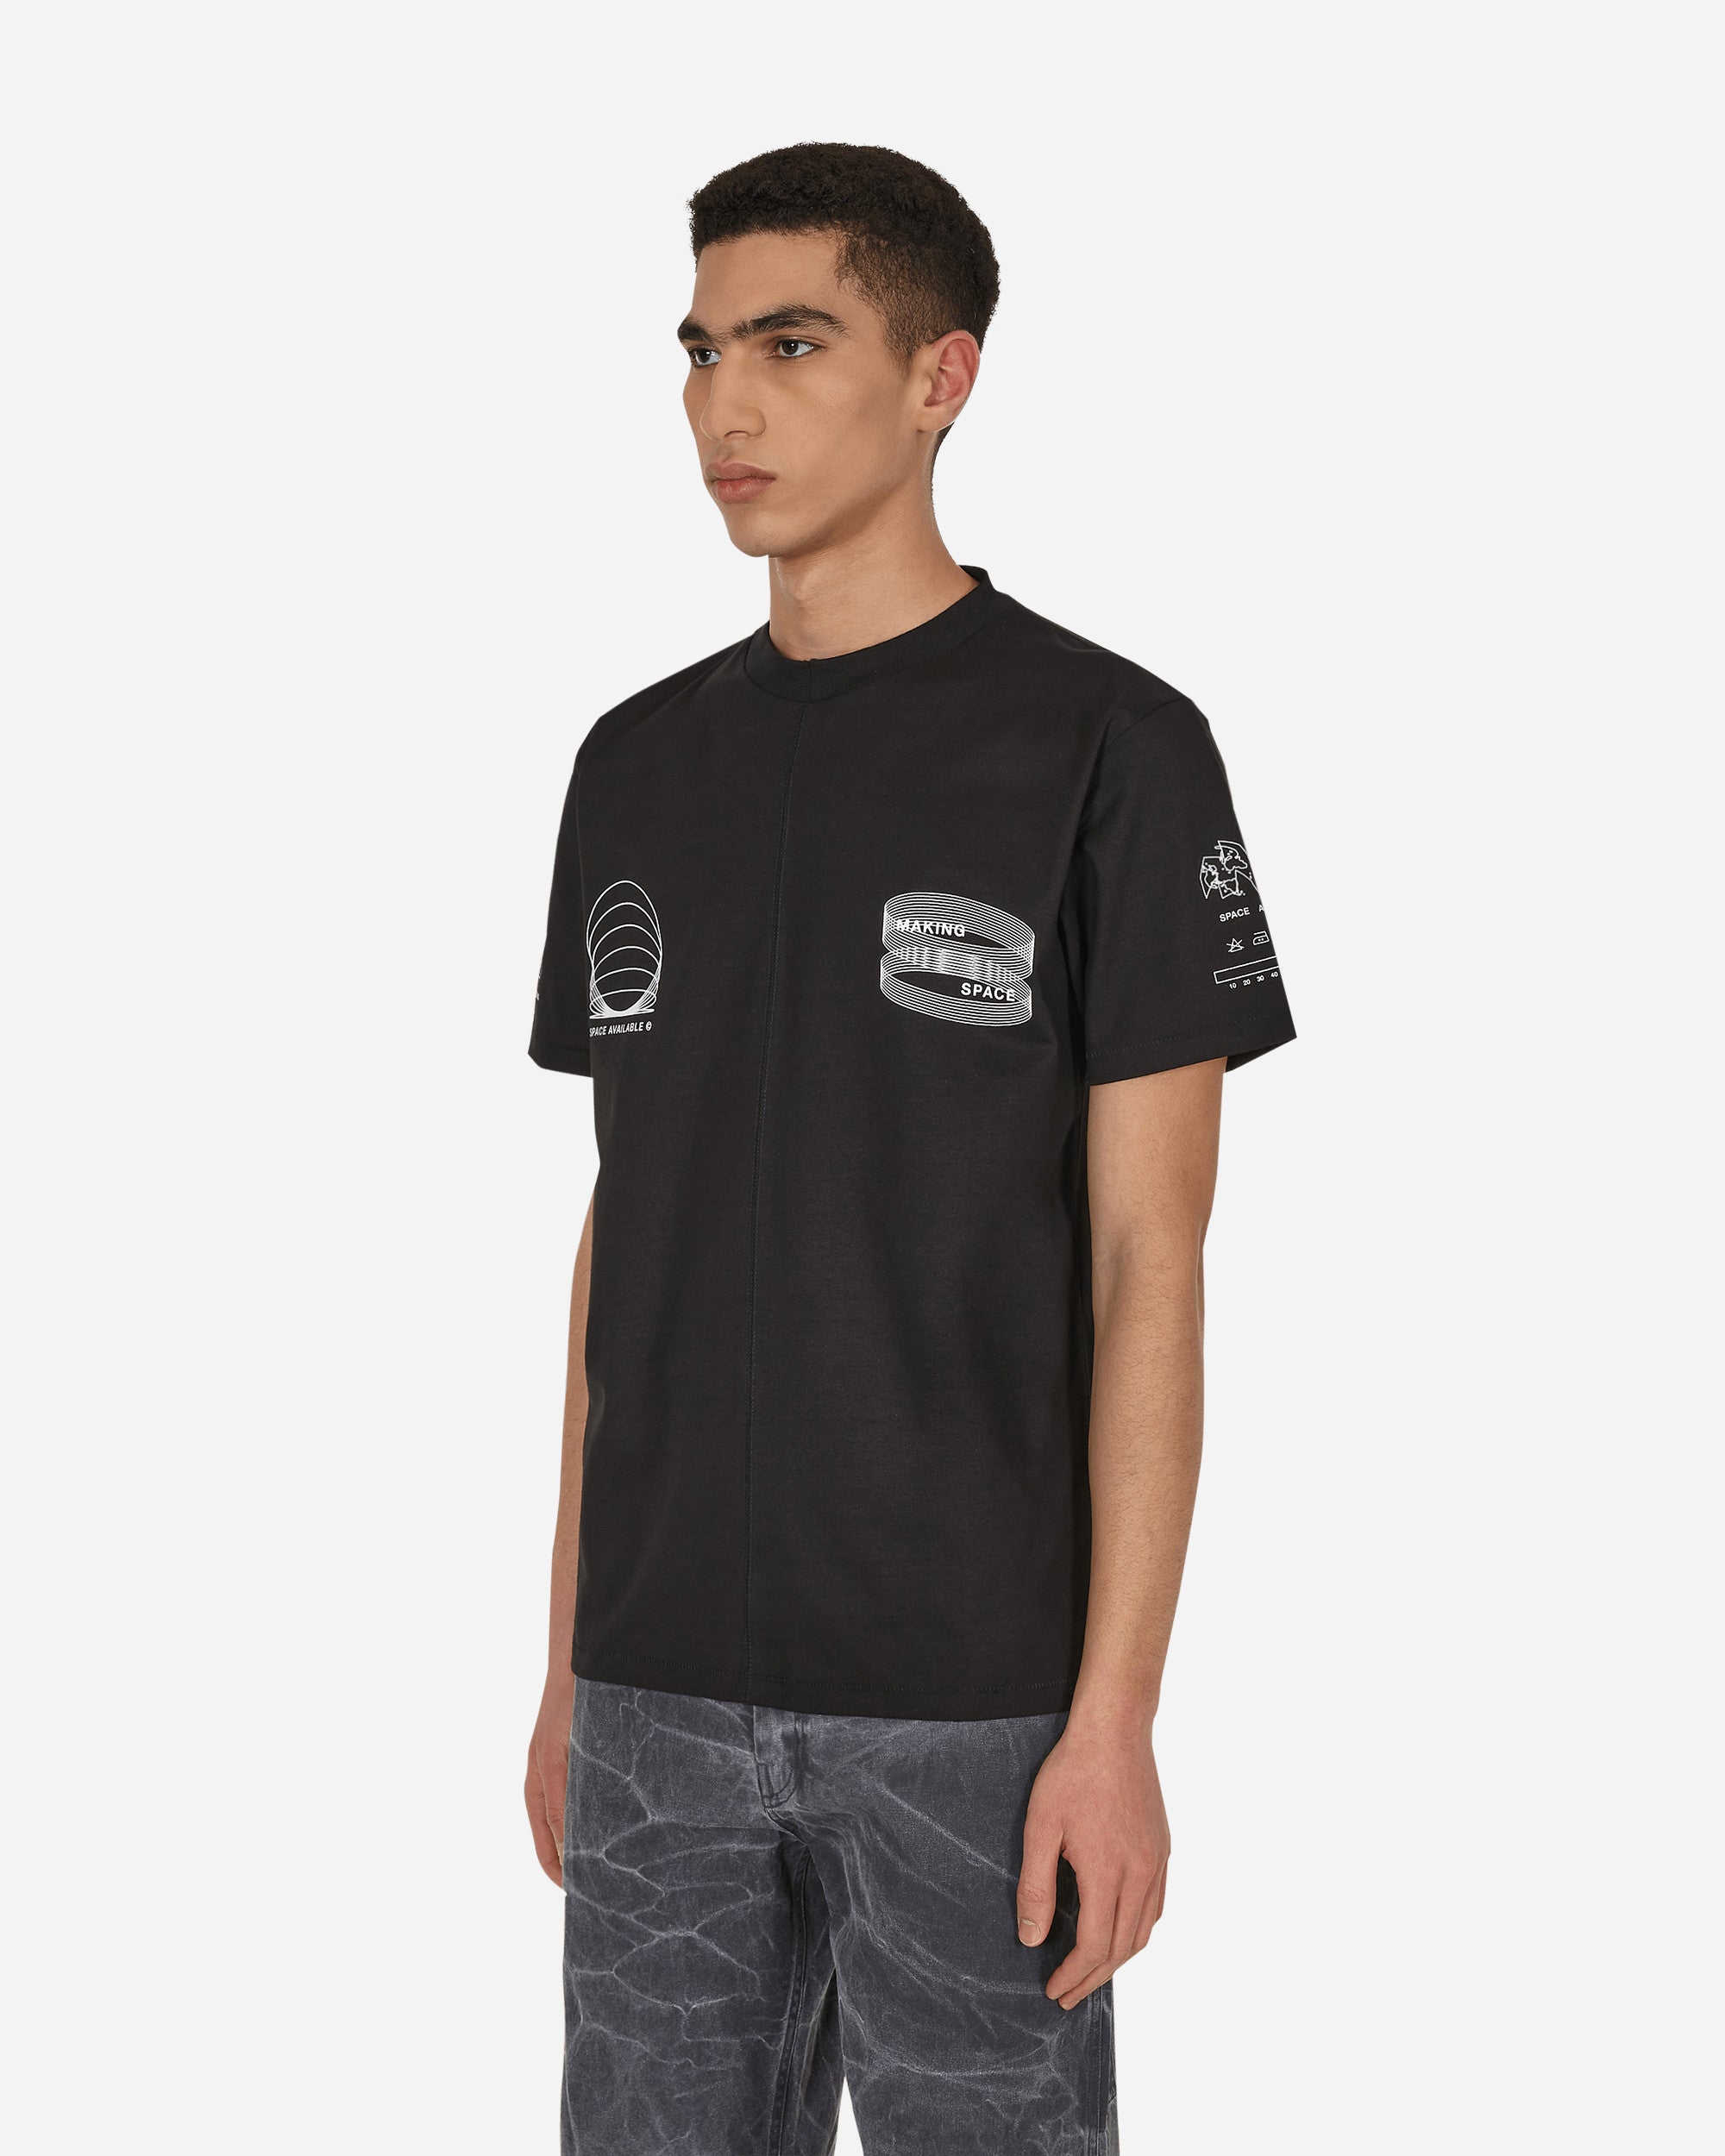 Space Available Connective Link Black T-Shirts Shortsleeve SA-CLT001-BLK BLACK